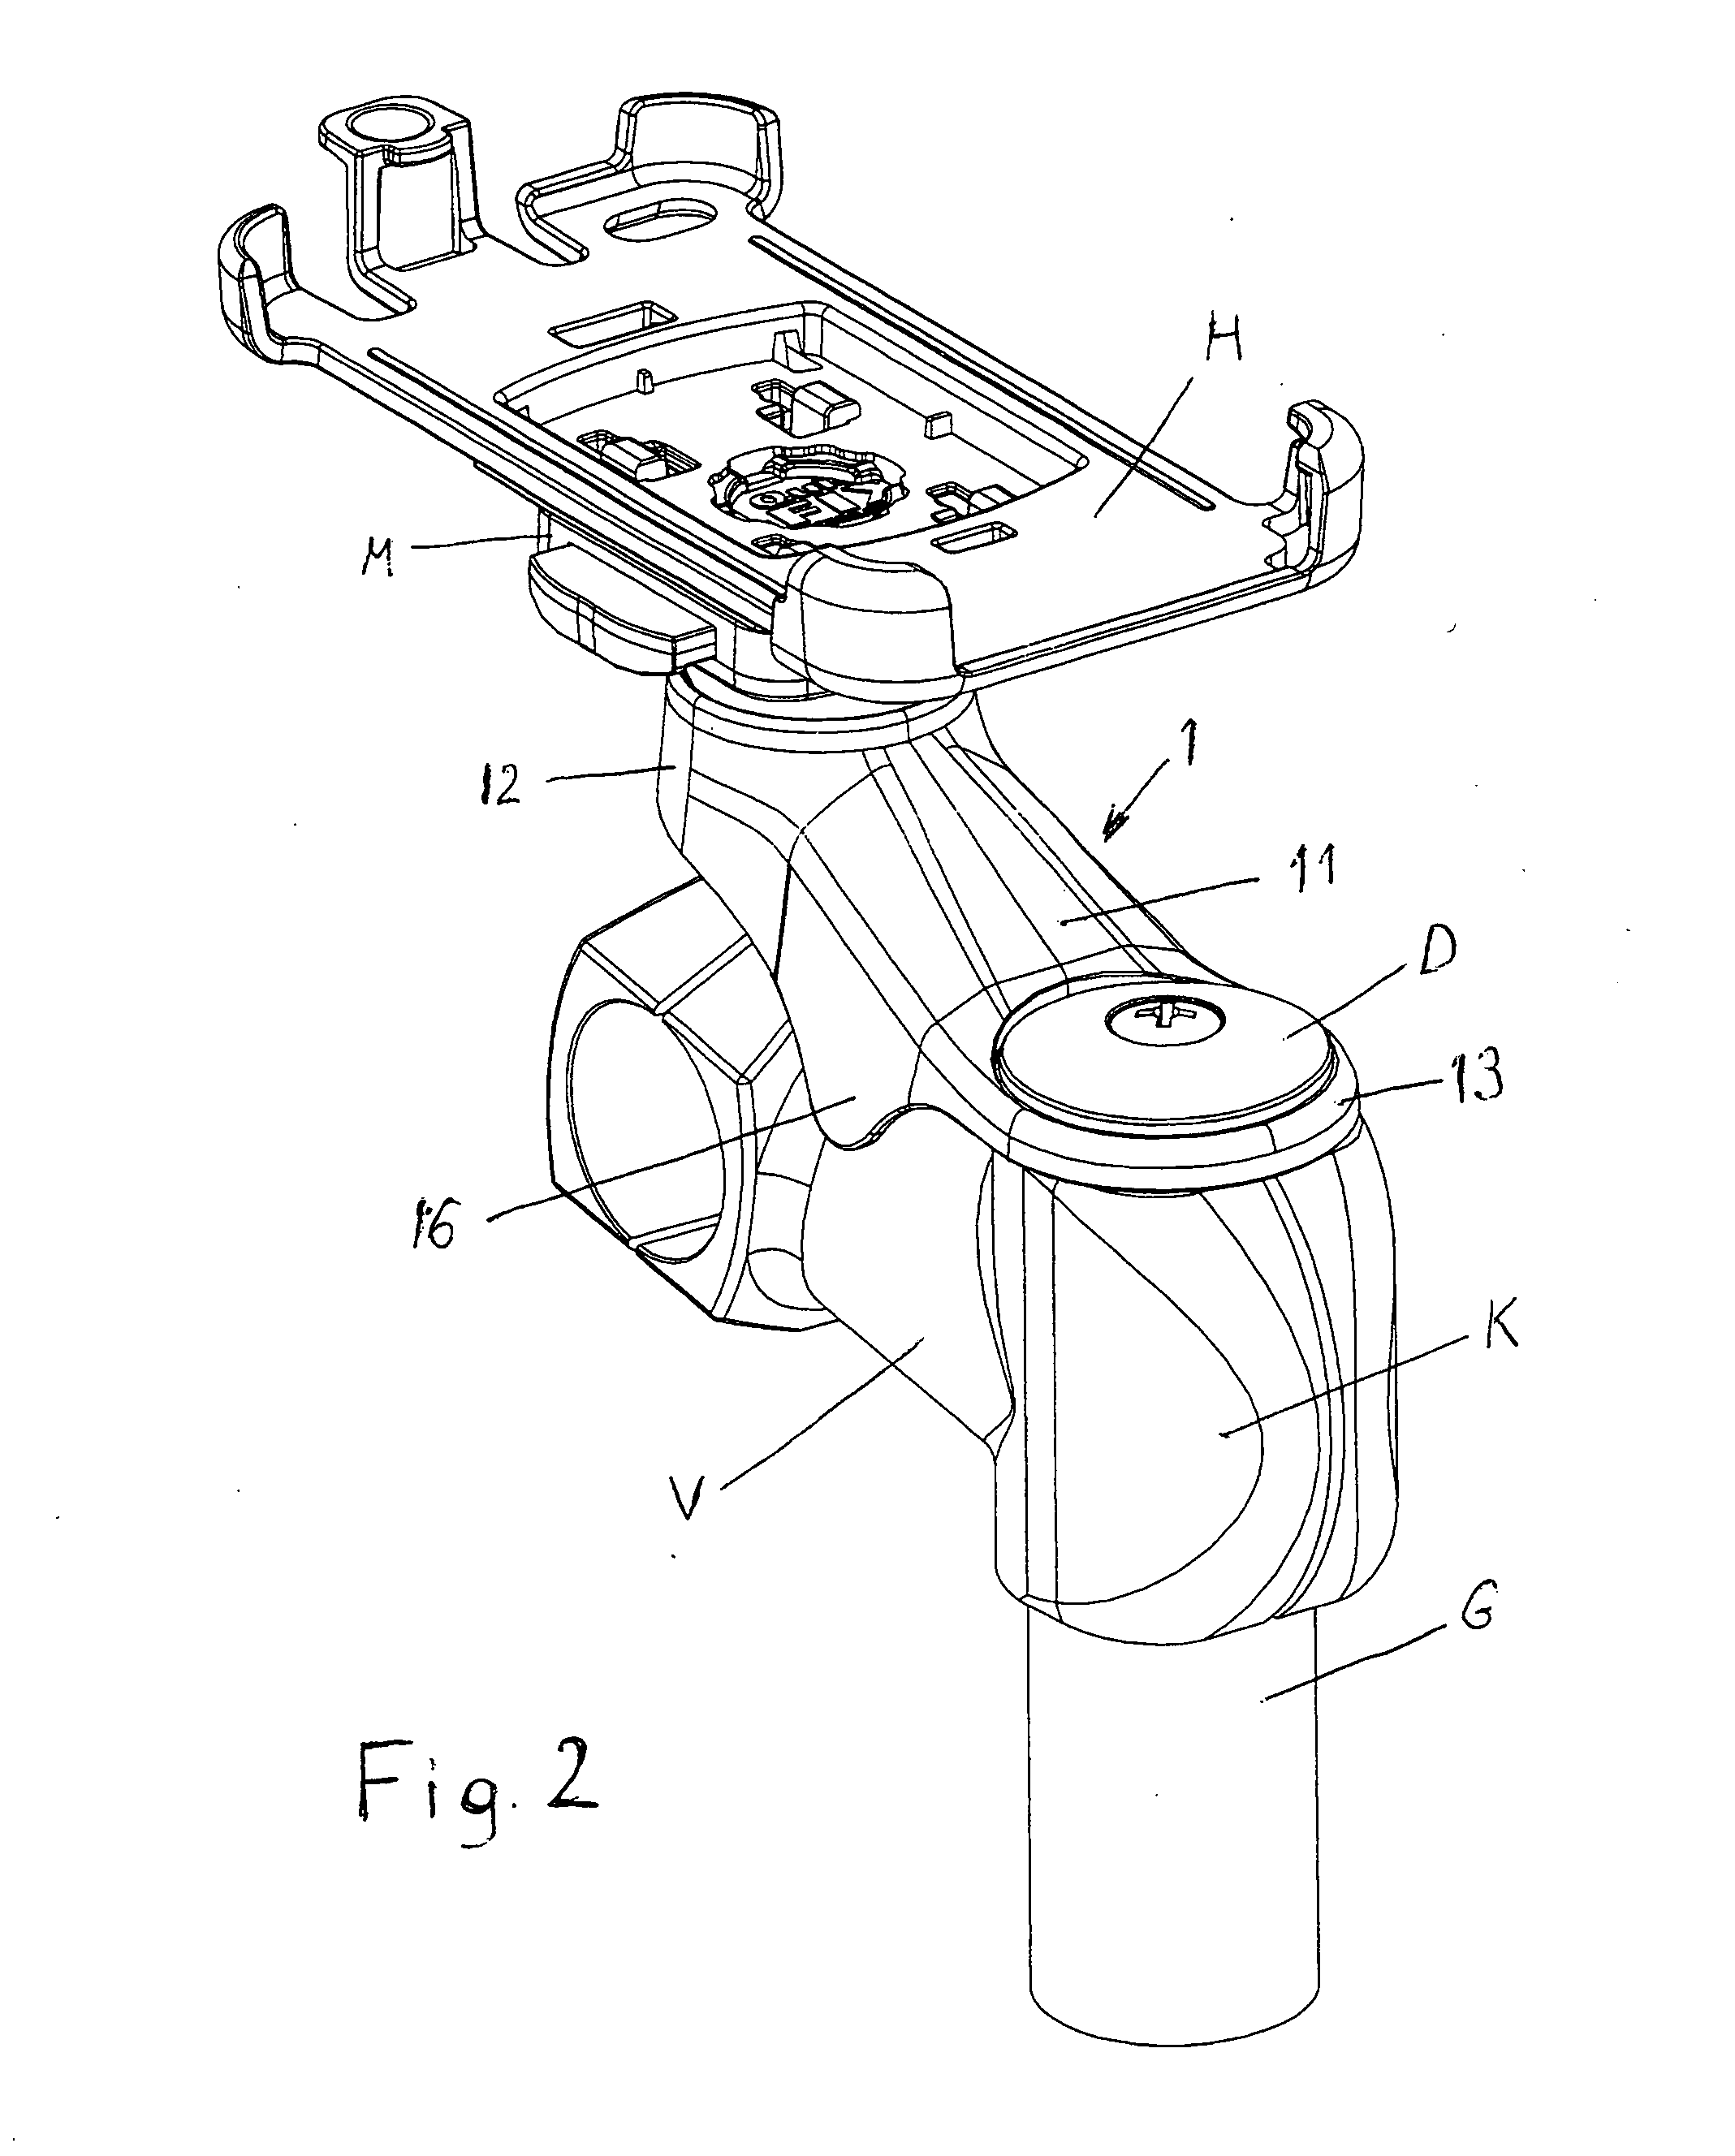 Apparatus support console for mobile telephones or similar apparatus on the handle bar of bikes